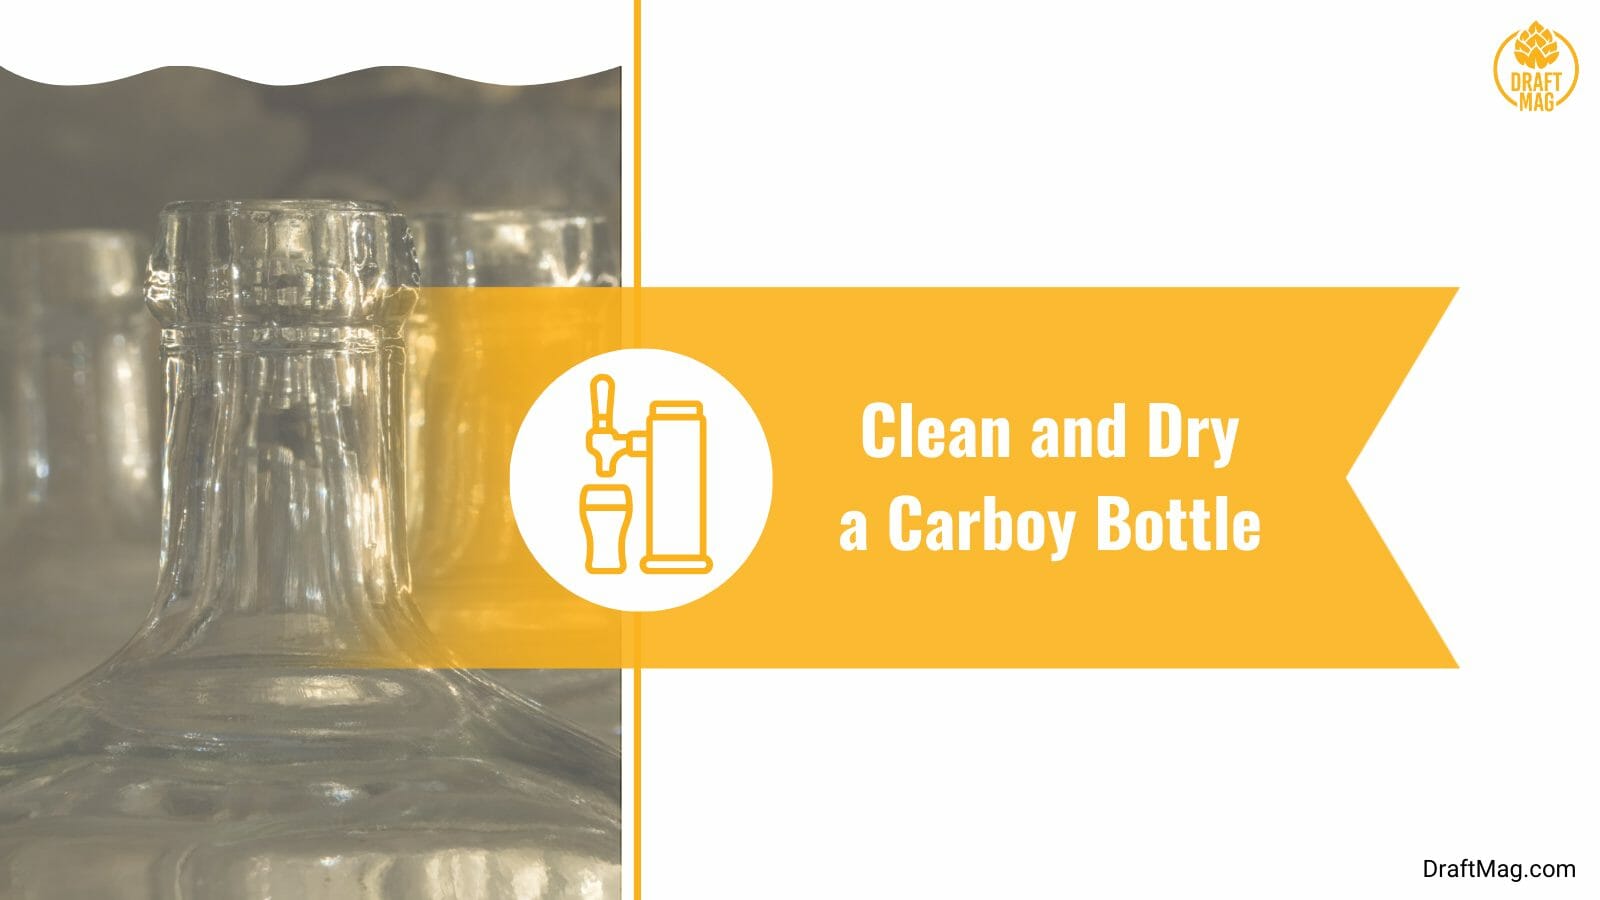 Cleaning a Carboy Bottle